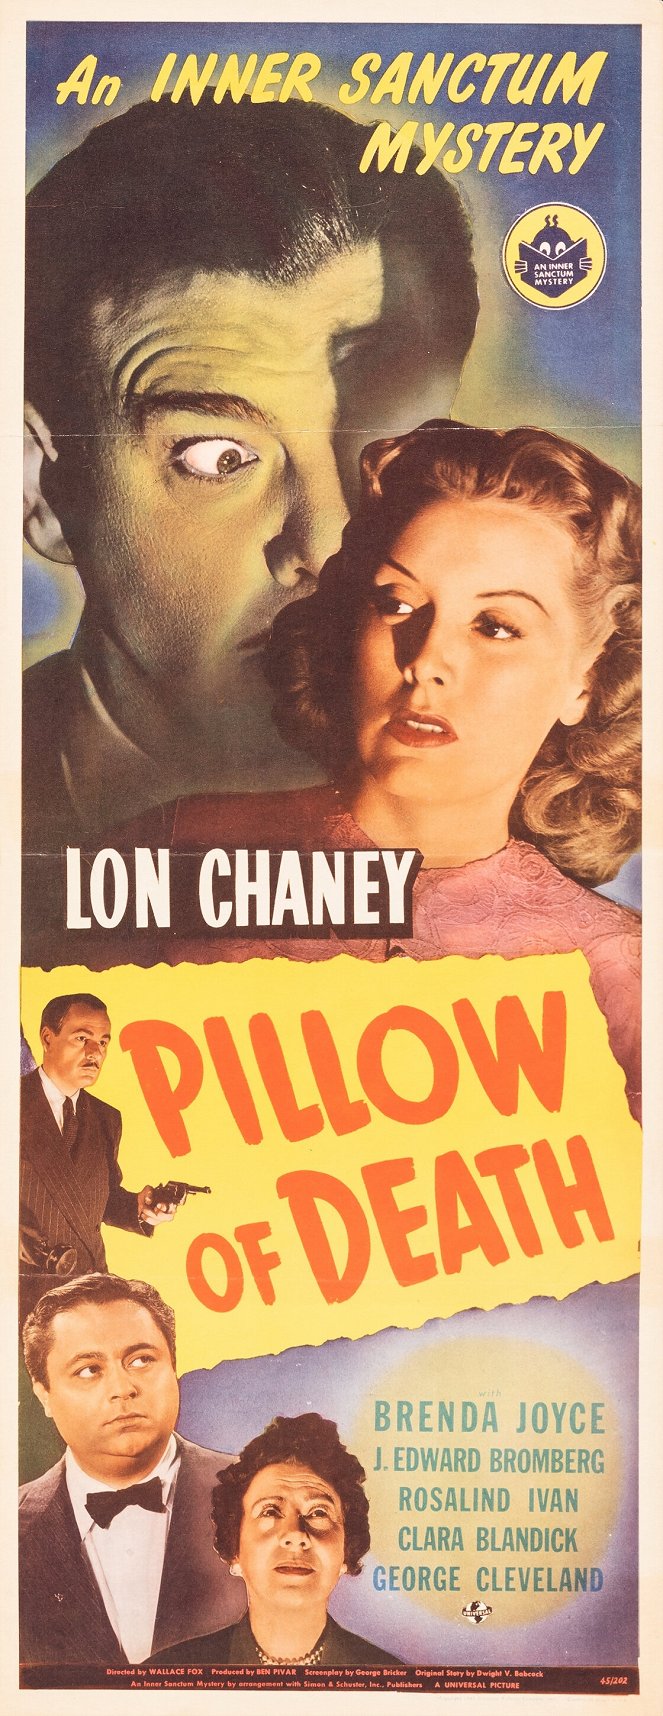 Pillow of Death - Posters